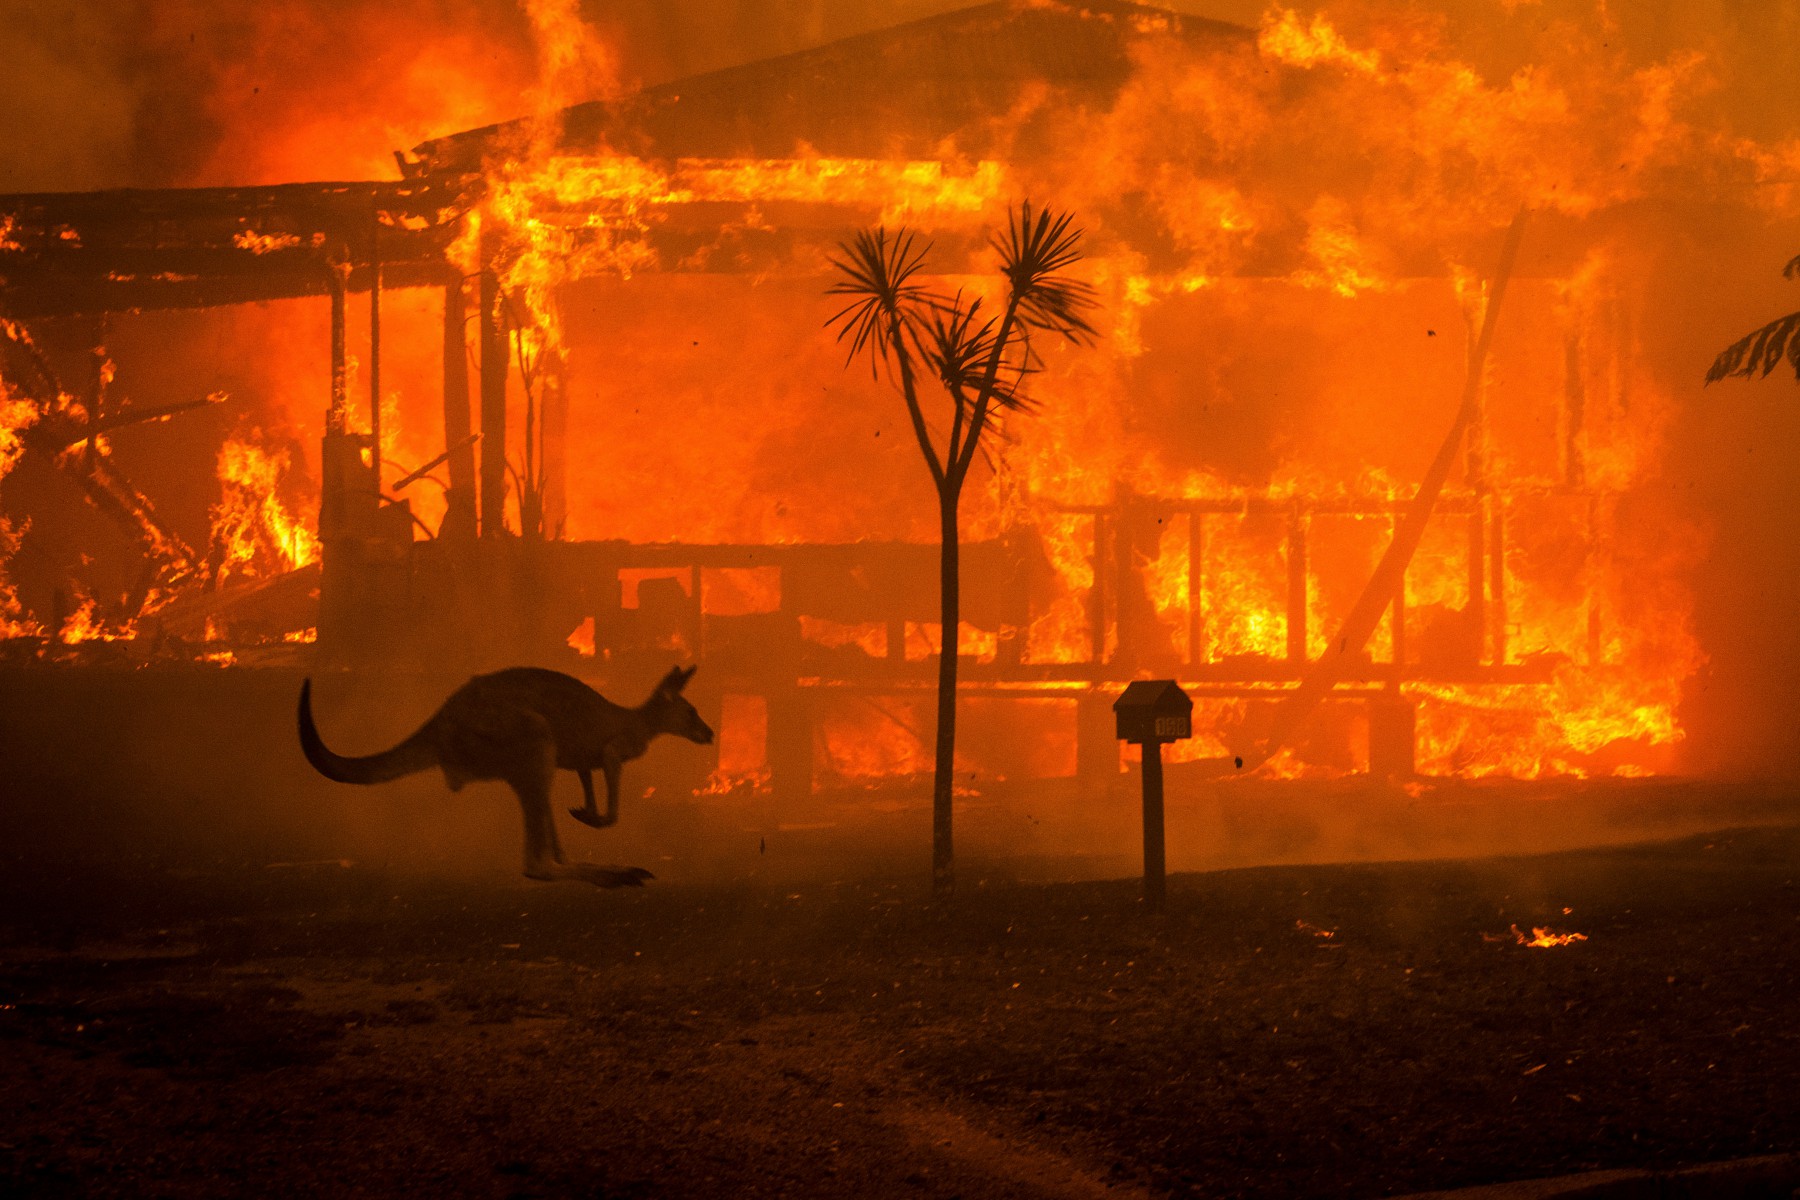  Wildfires have raged across the Australian continent in recent months, killing 17 people so far